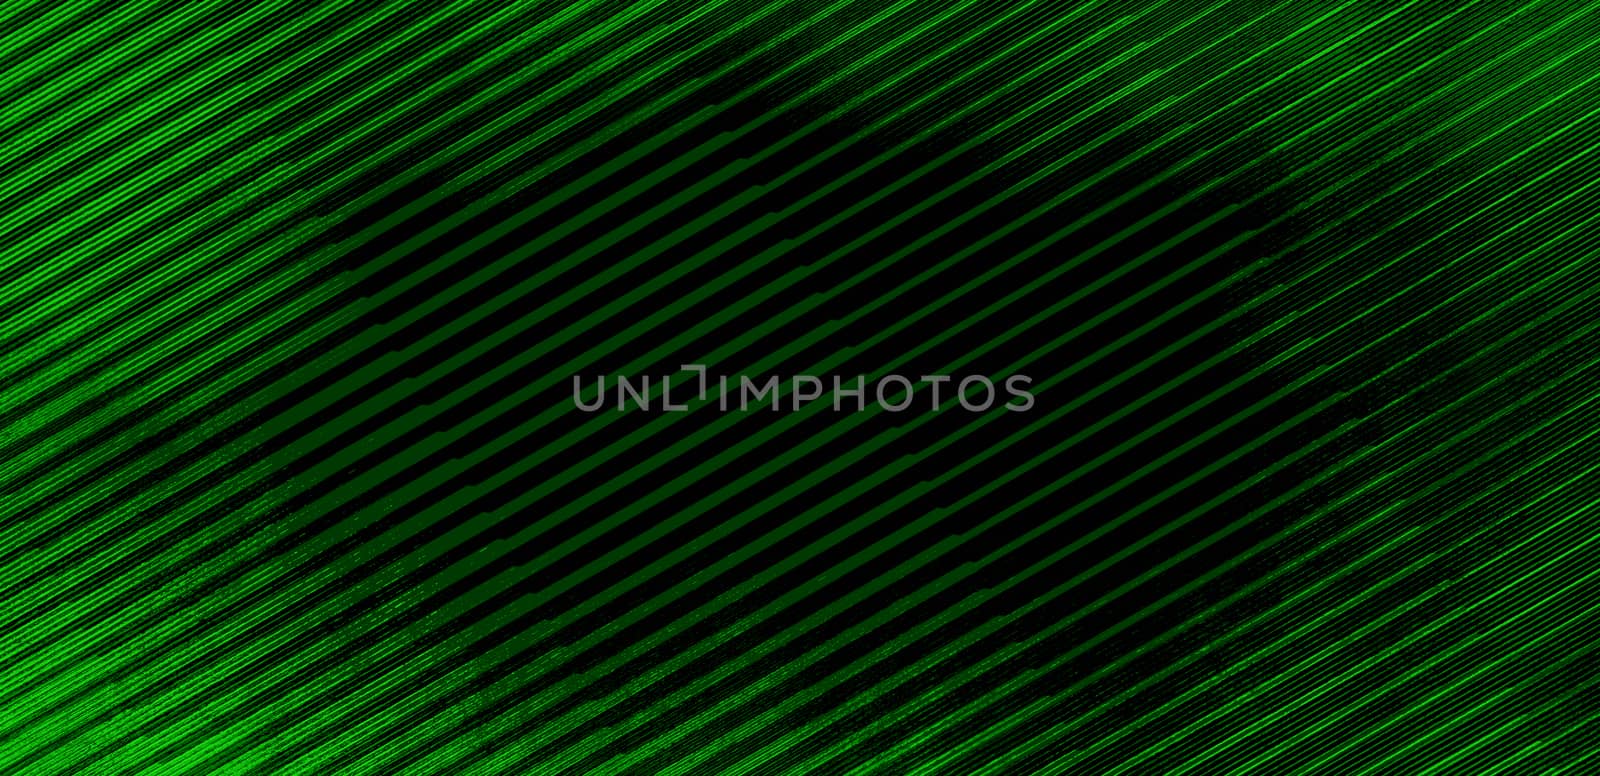 green abstract illustration which can be used as a background